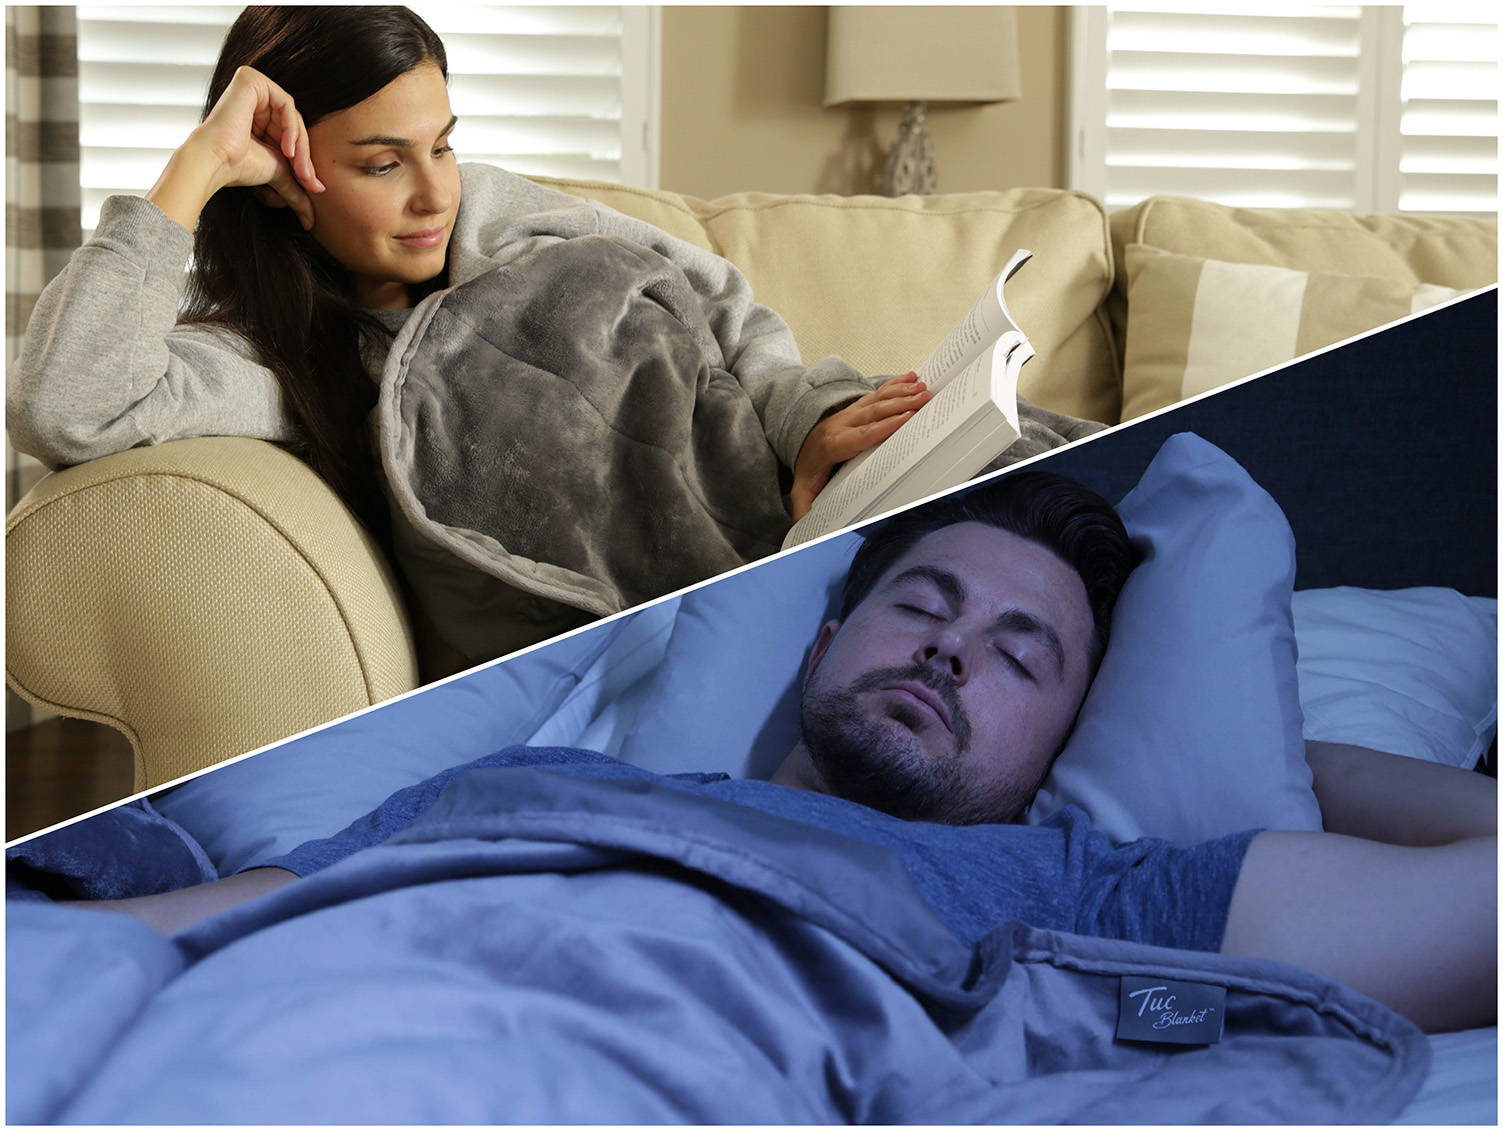 Two part image. Man sleeping peacefully with a Tuc Cool weighted blanket. Woman reading a book on a couch with the Tuc Warm weighted blanket.